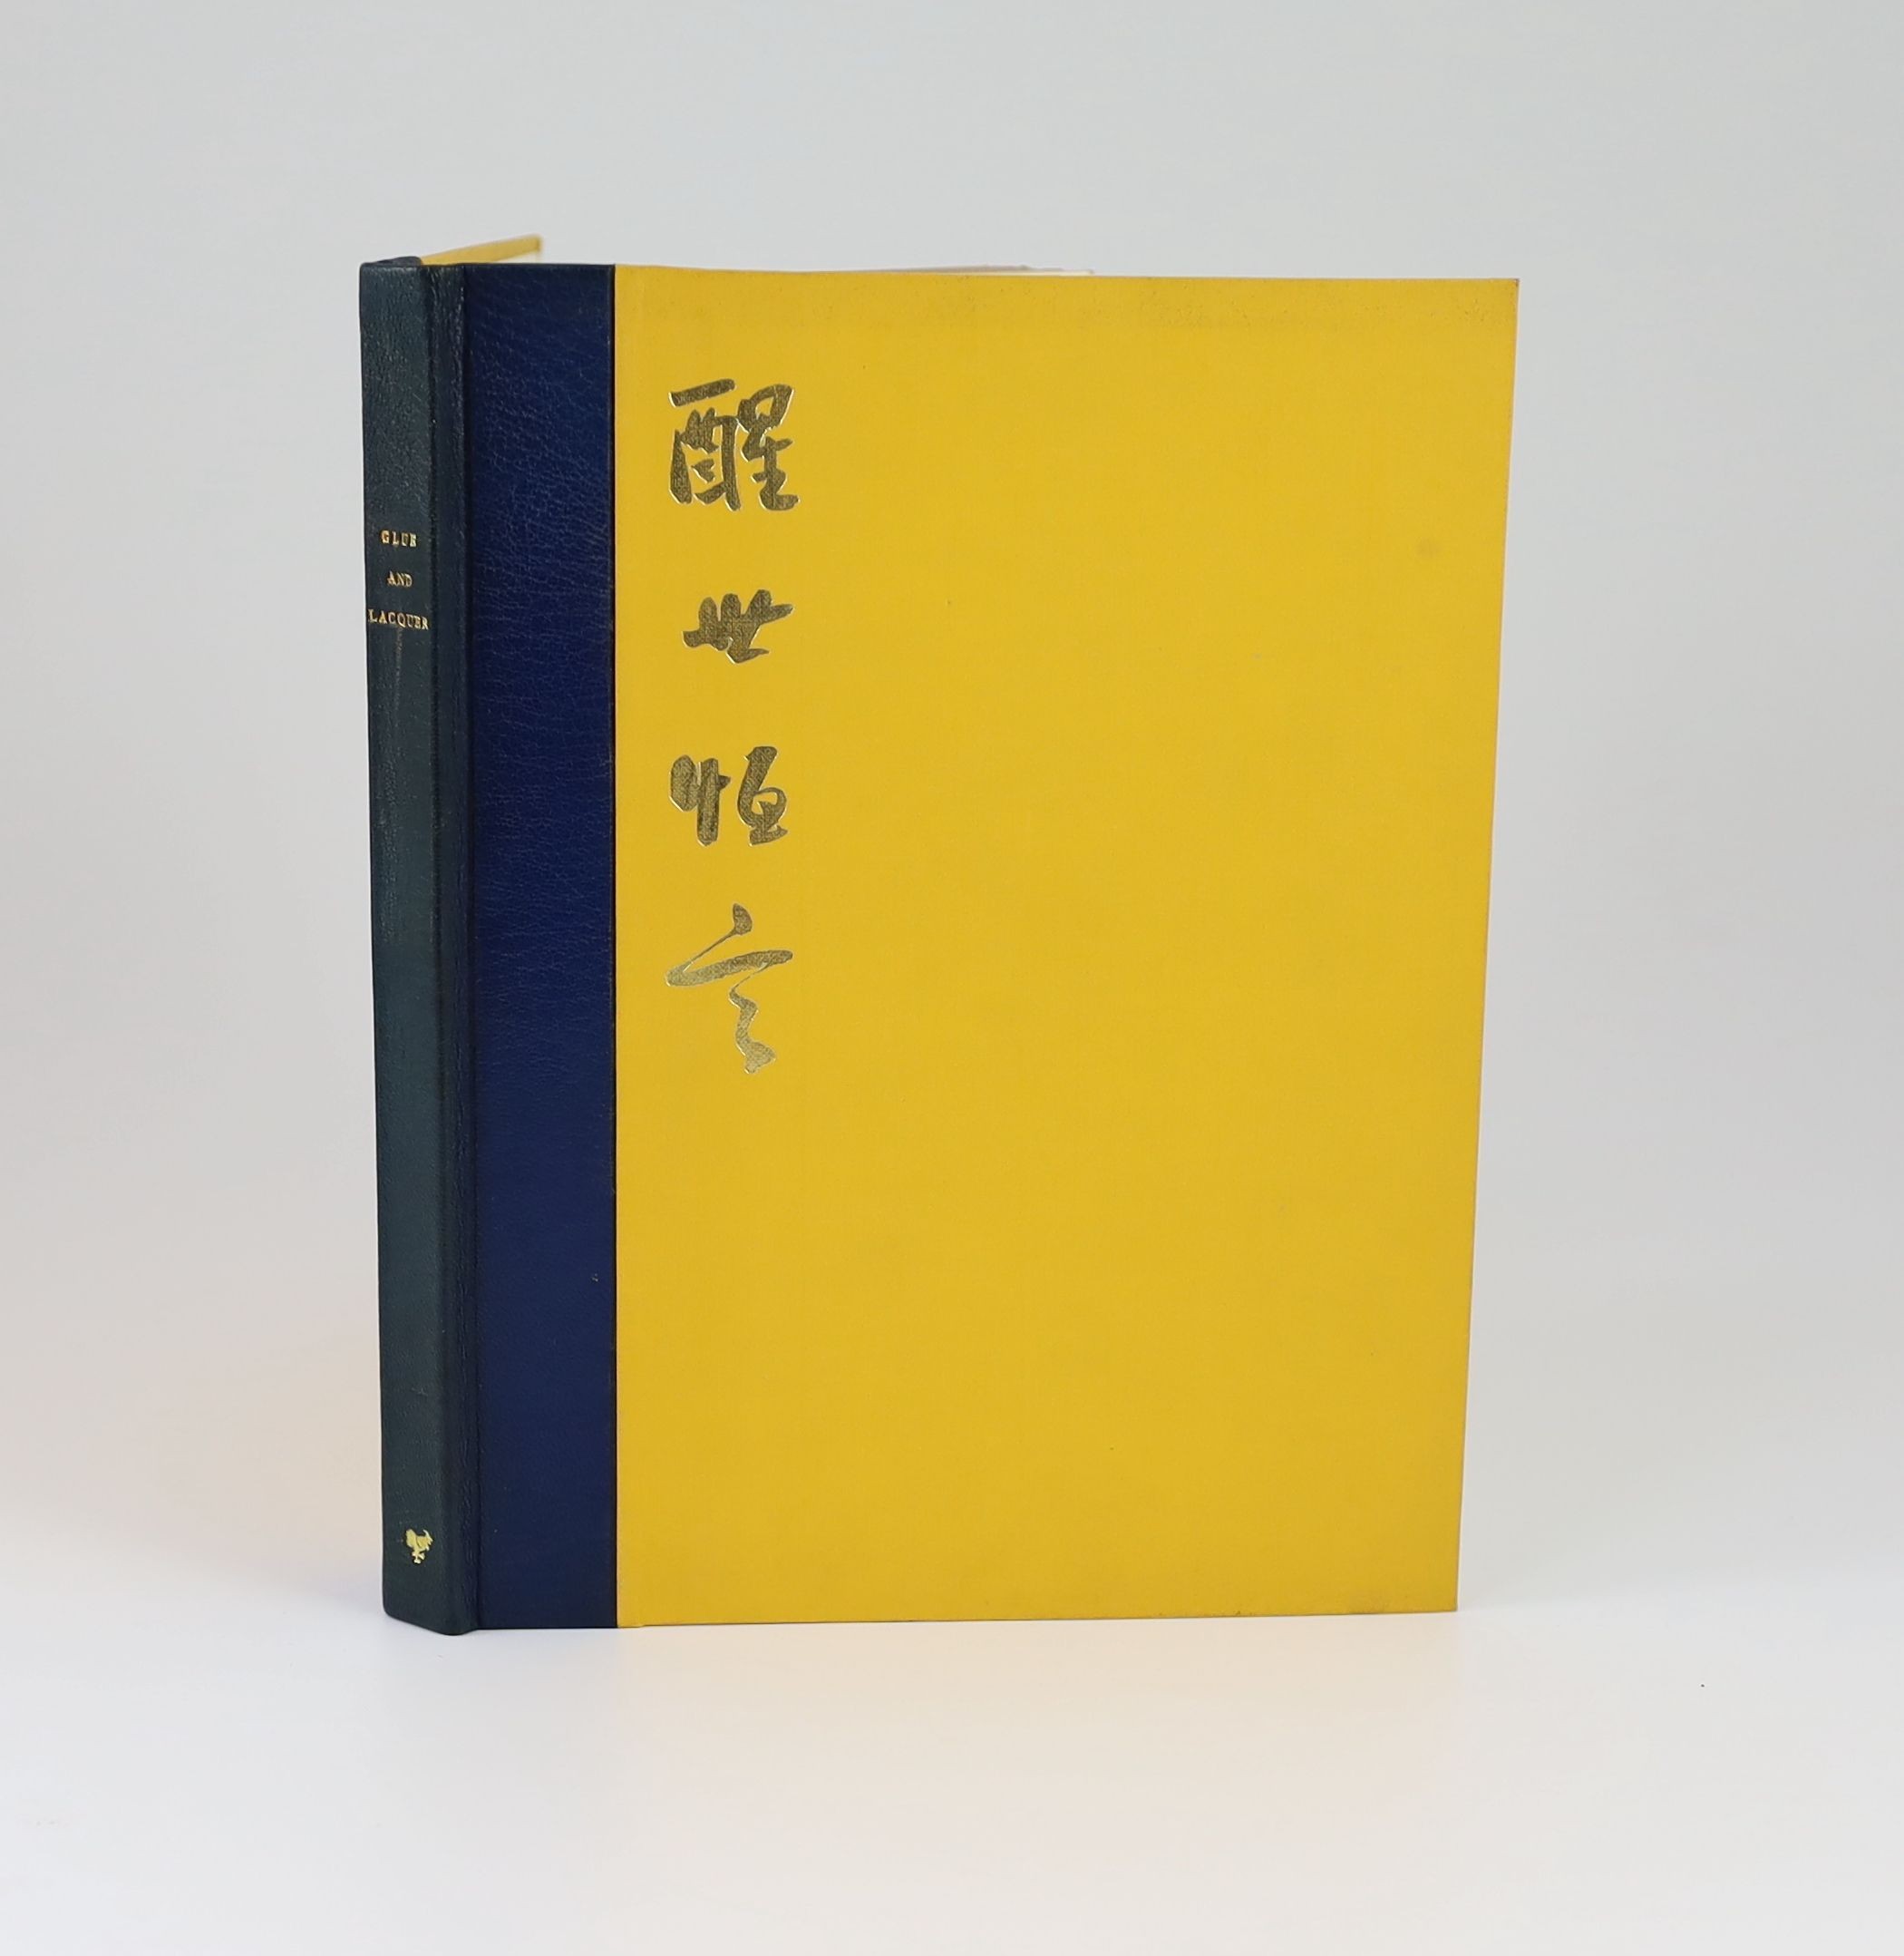 Golden Cockerel Press - Glue and Lacquer, one of 350, illustrated with 5 copper engravings of drawings Eric Gill, executed by his son-in-law-law Denis Tegetmeier, 4to, original yellow boards with blue morocco spine, Walt